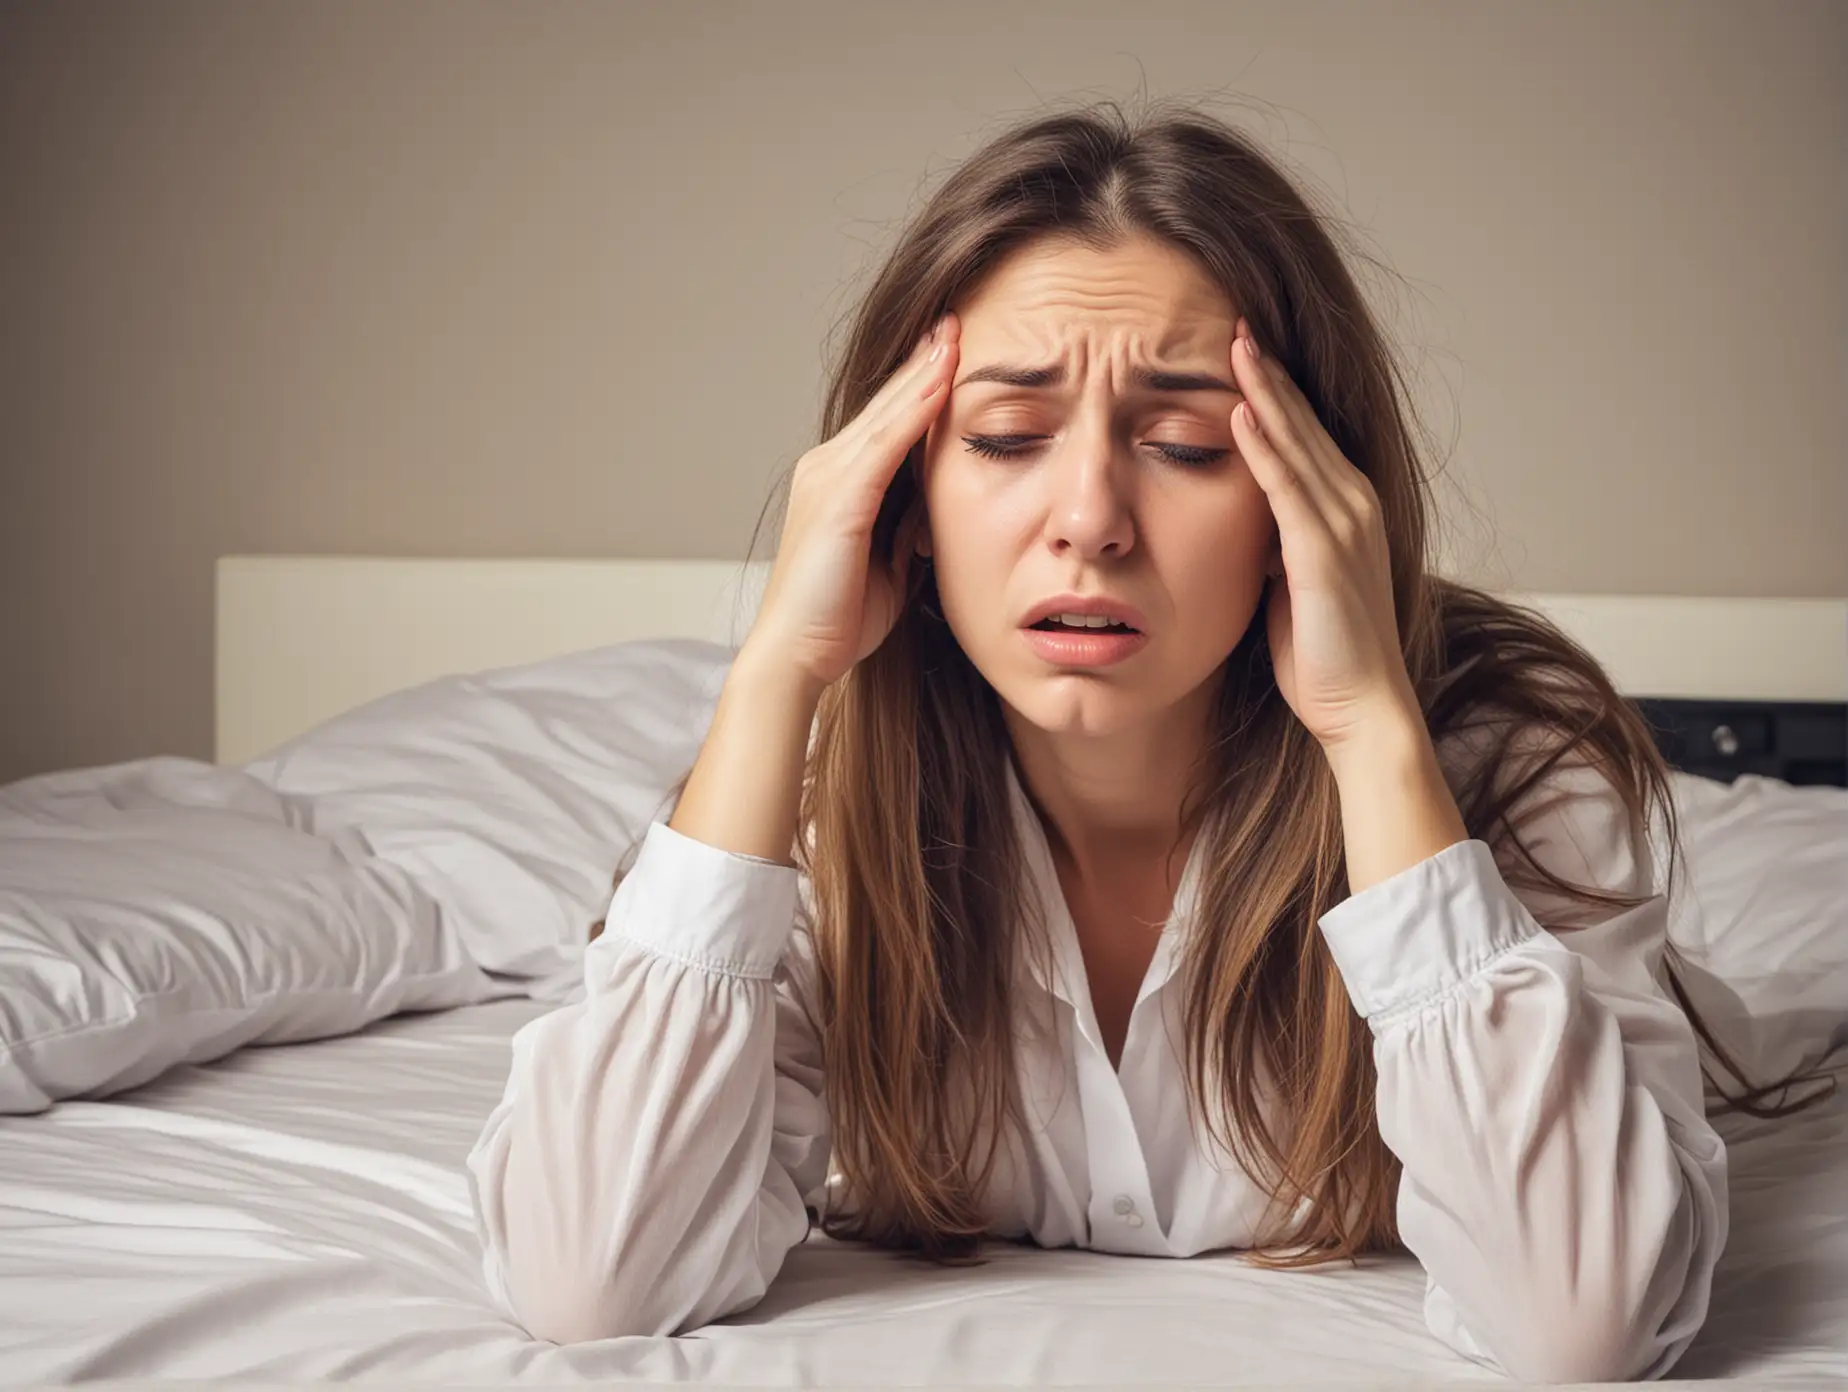 Young Woman Experiencing Hangover Symptoms